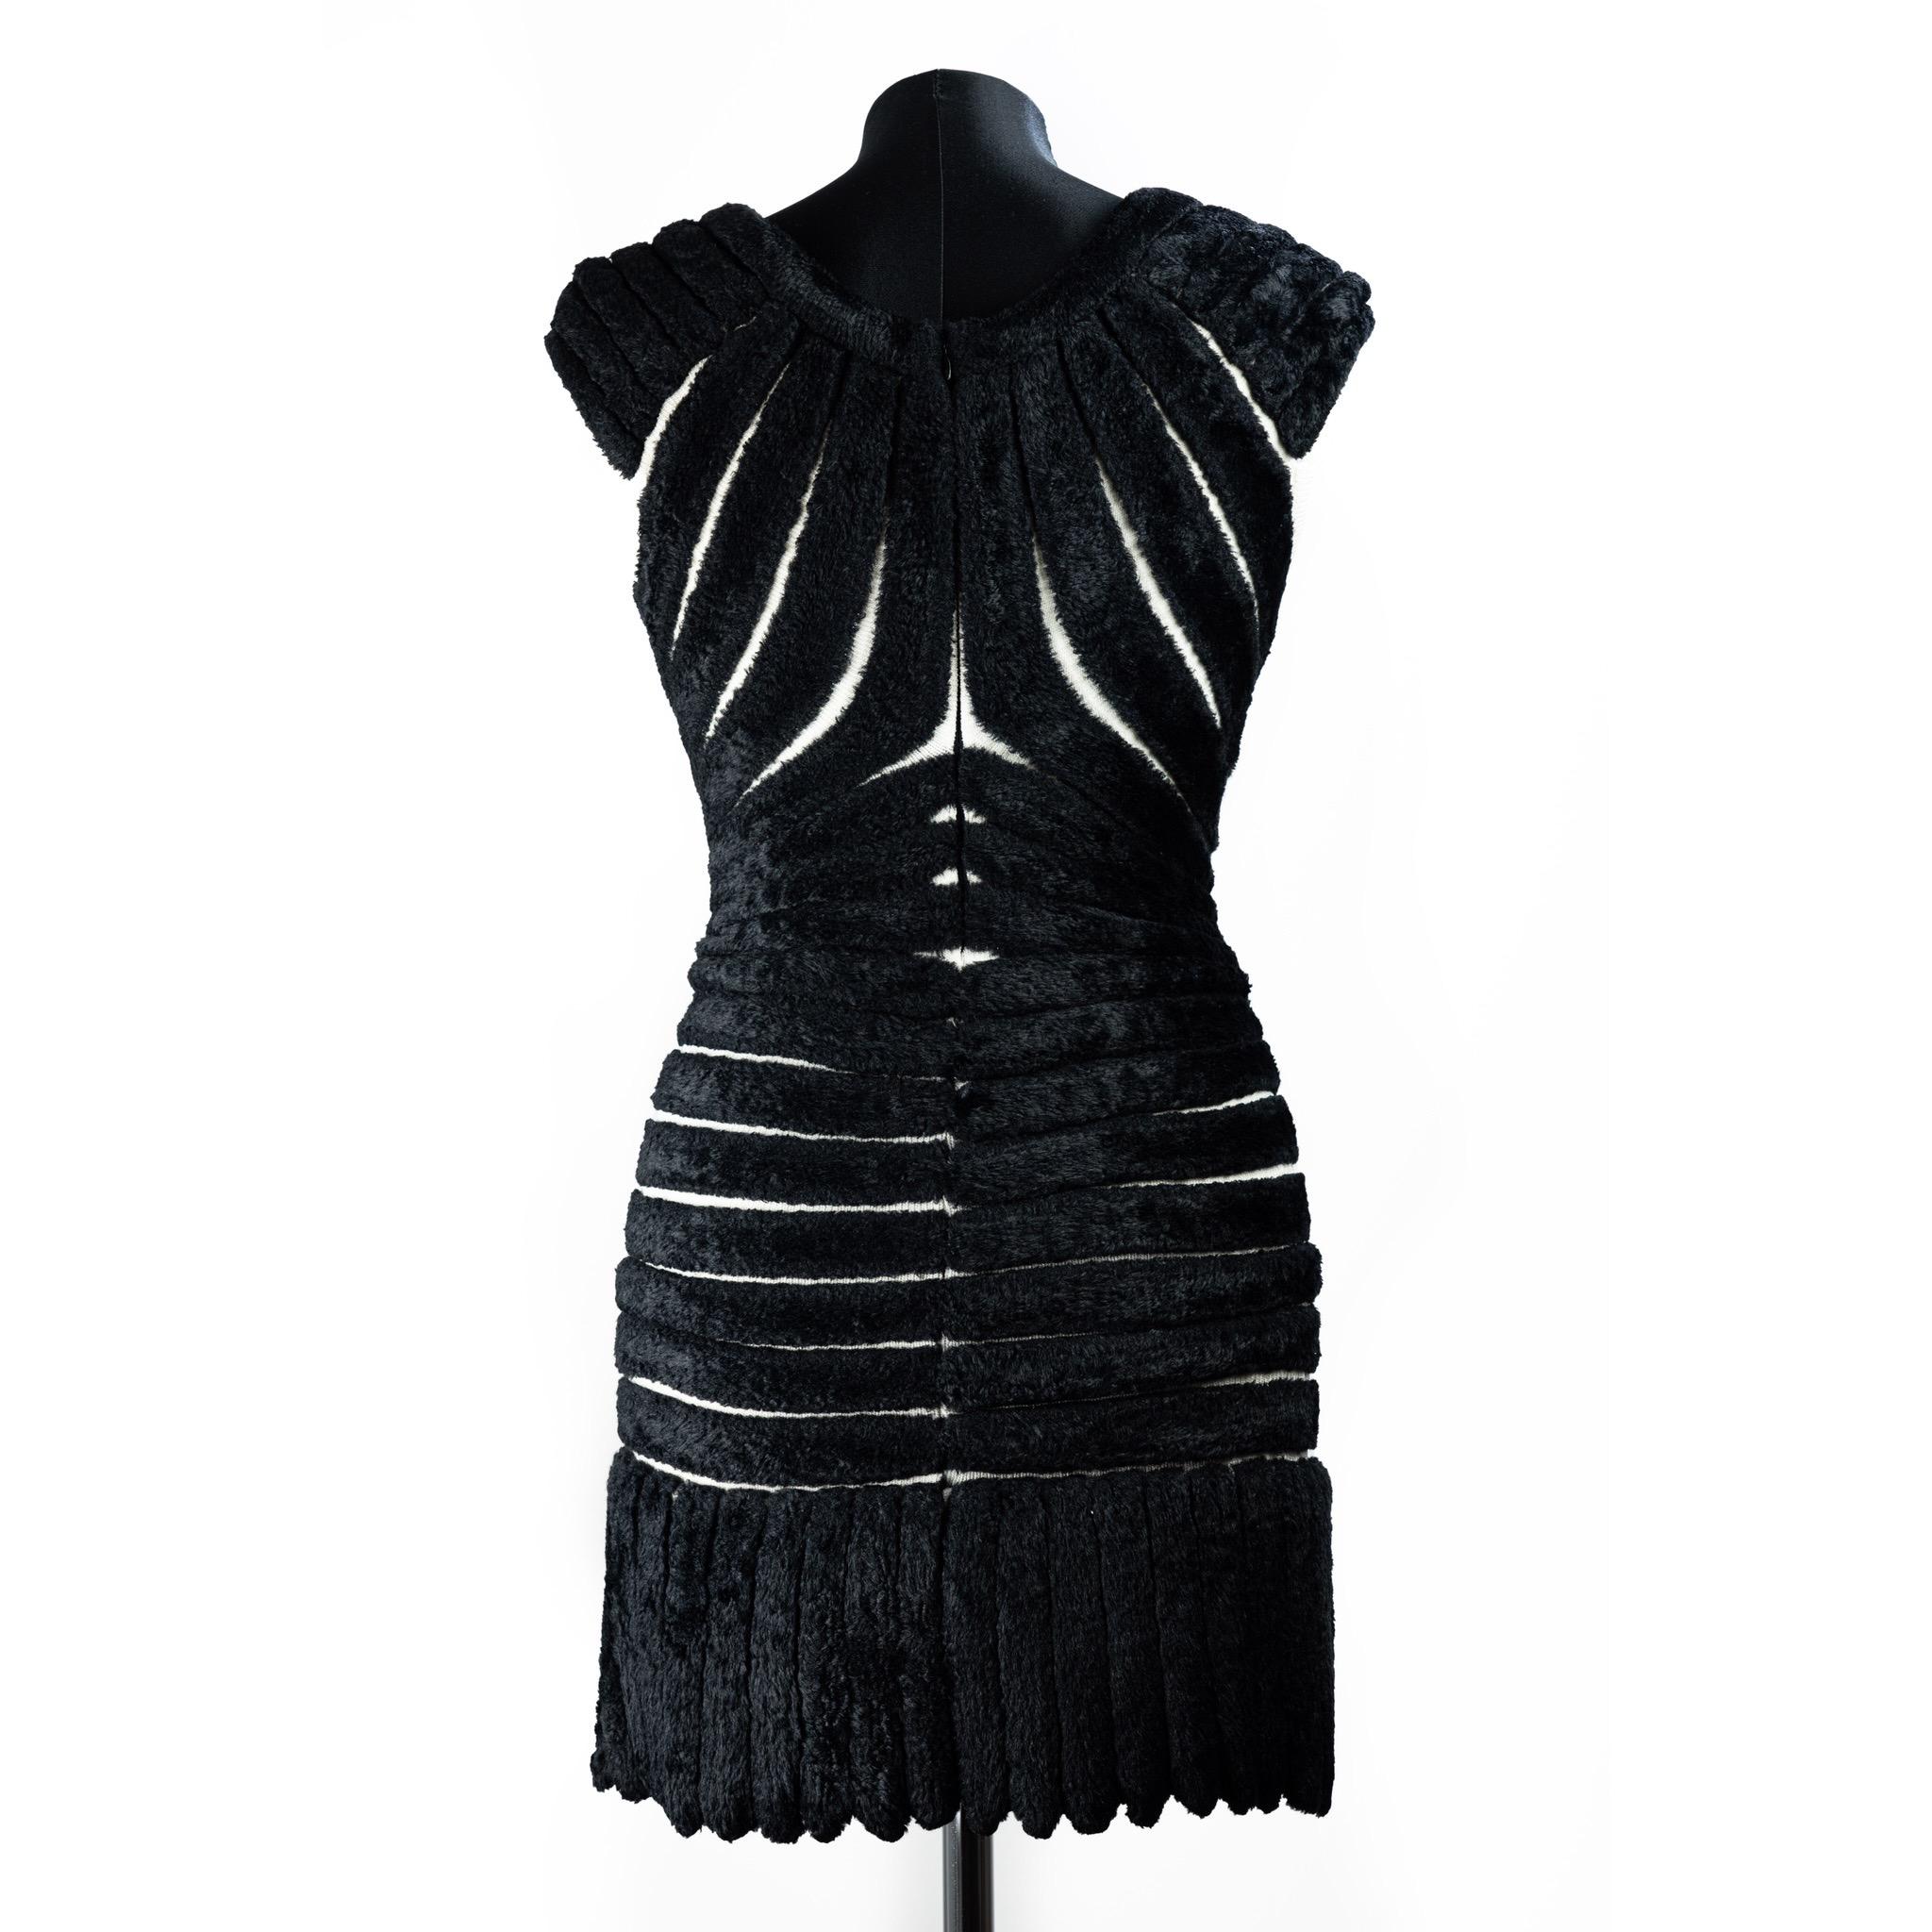 Azzedine Alaia black chenille knitted 'houpette' mini dress. Sculpted figure-hugging design with concentric chenille bands.
From Spring Summer 1994 collection.
Made in in a fluffy chenille or Houpette to resemble swans down. Featuring a panels of